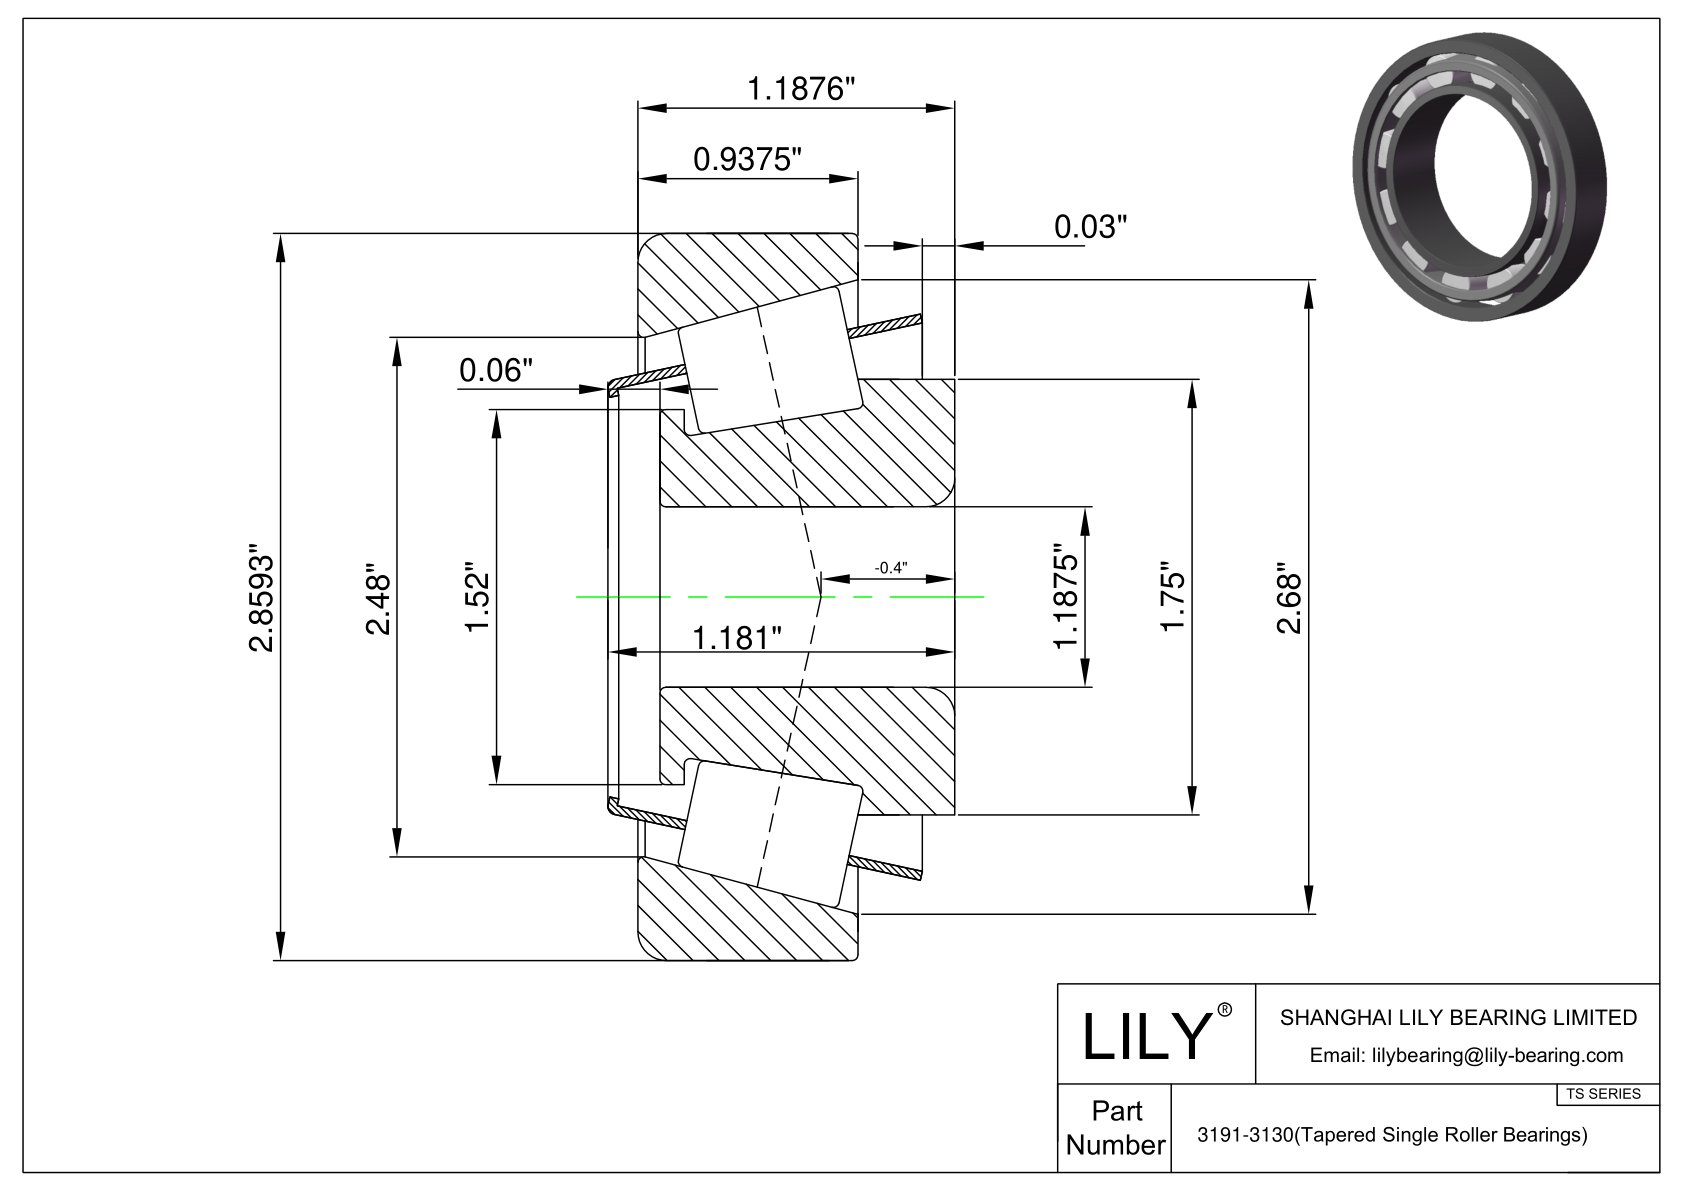 3191-3130 TS (Tapered Single Roller Bearings) (Imperial) cad drawing